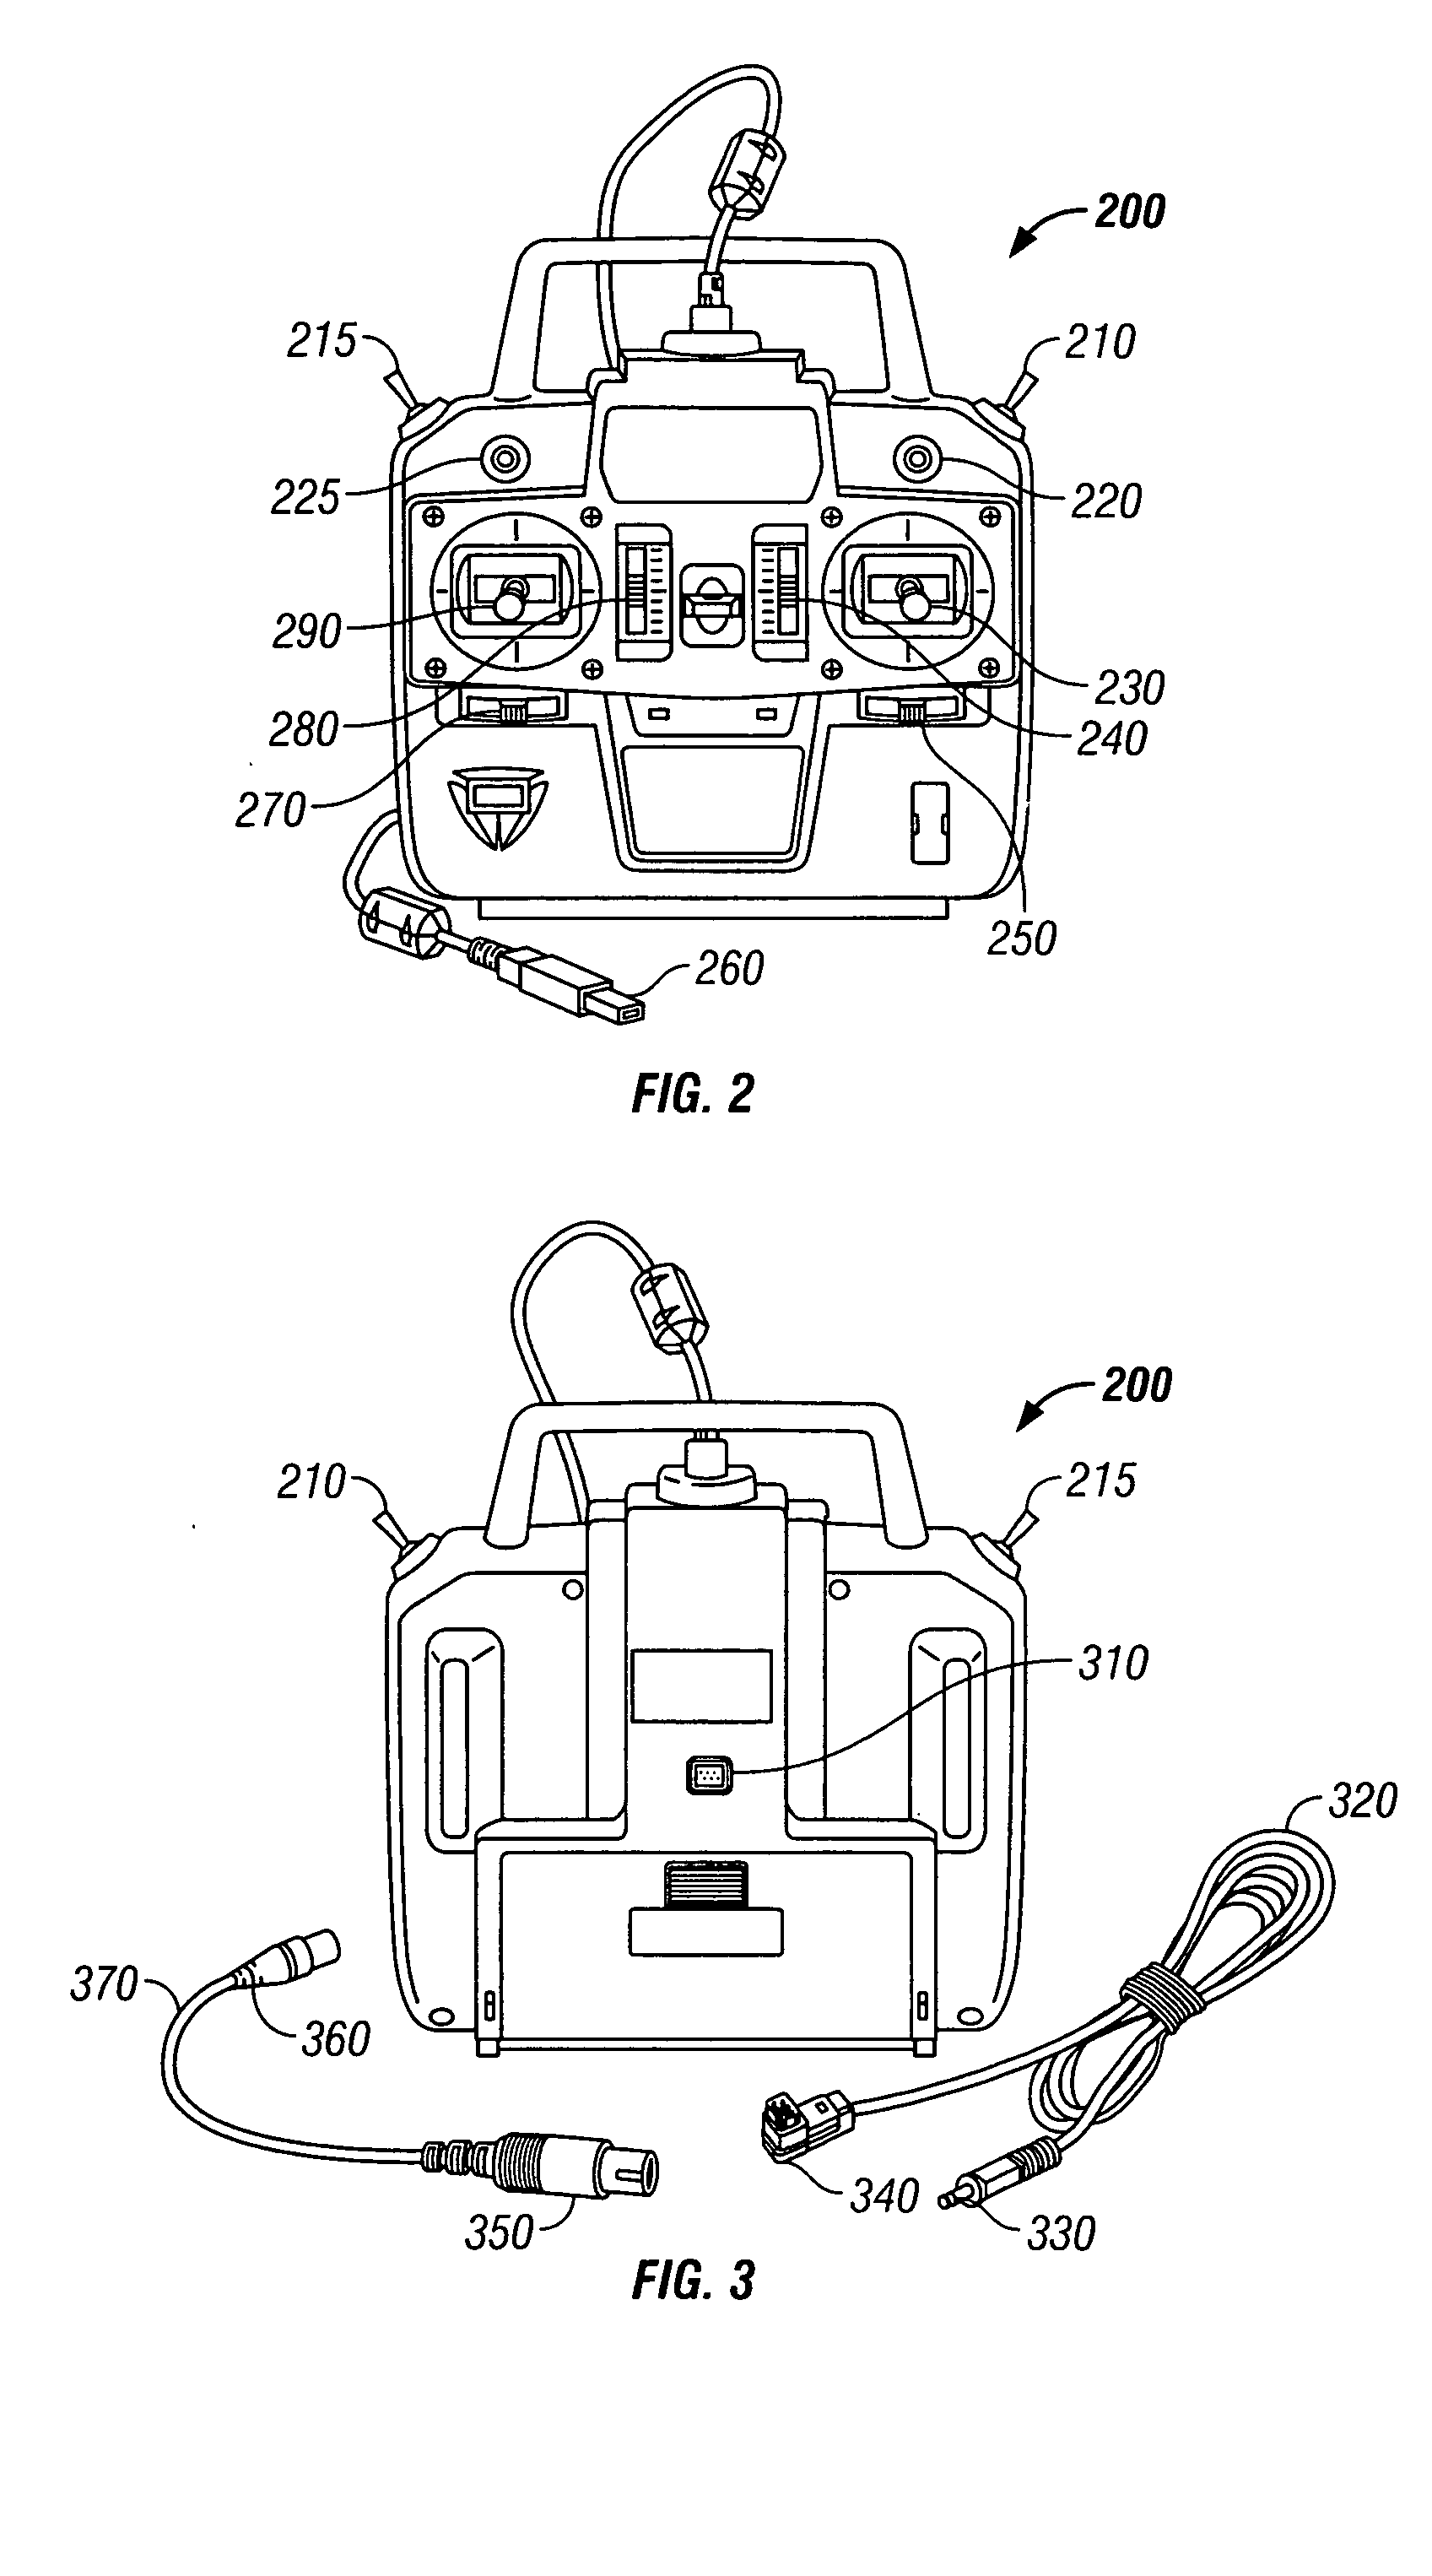 System and method for converting radio control transmitter and joystick controller signals into universal serial bus signals